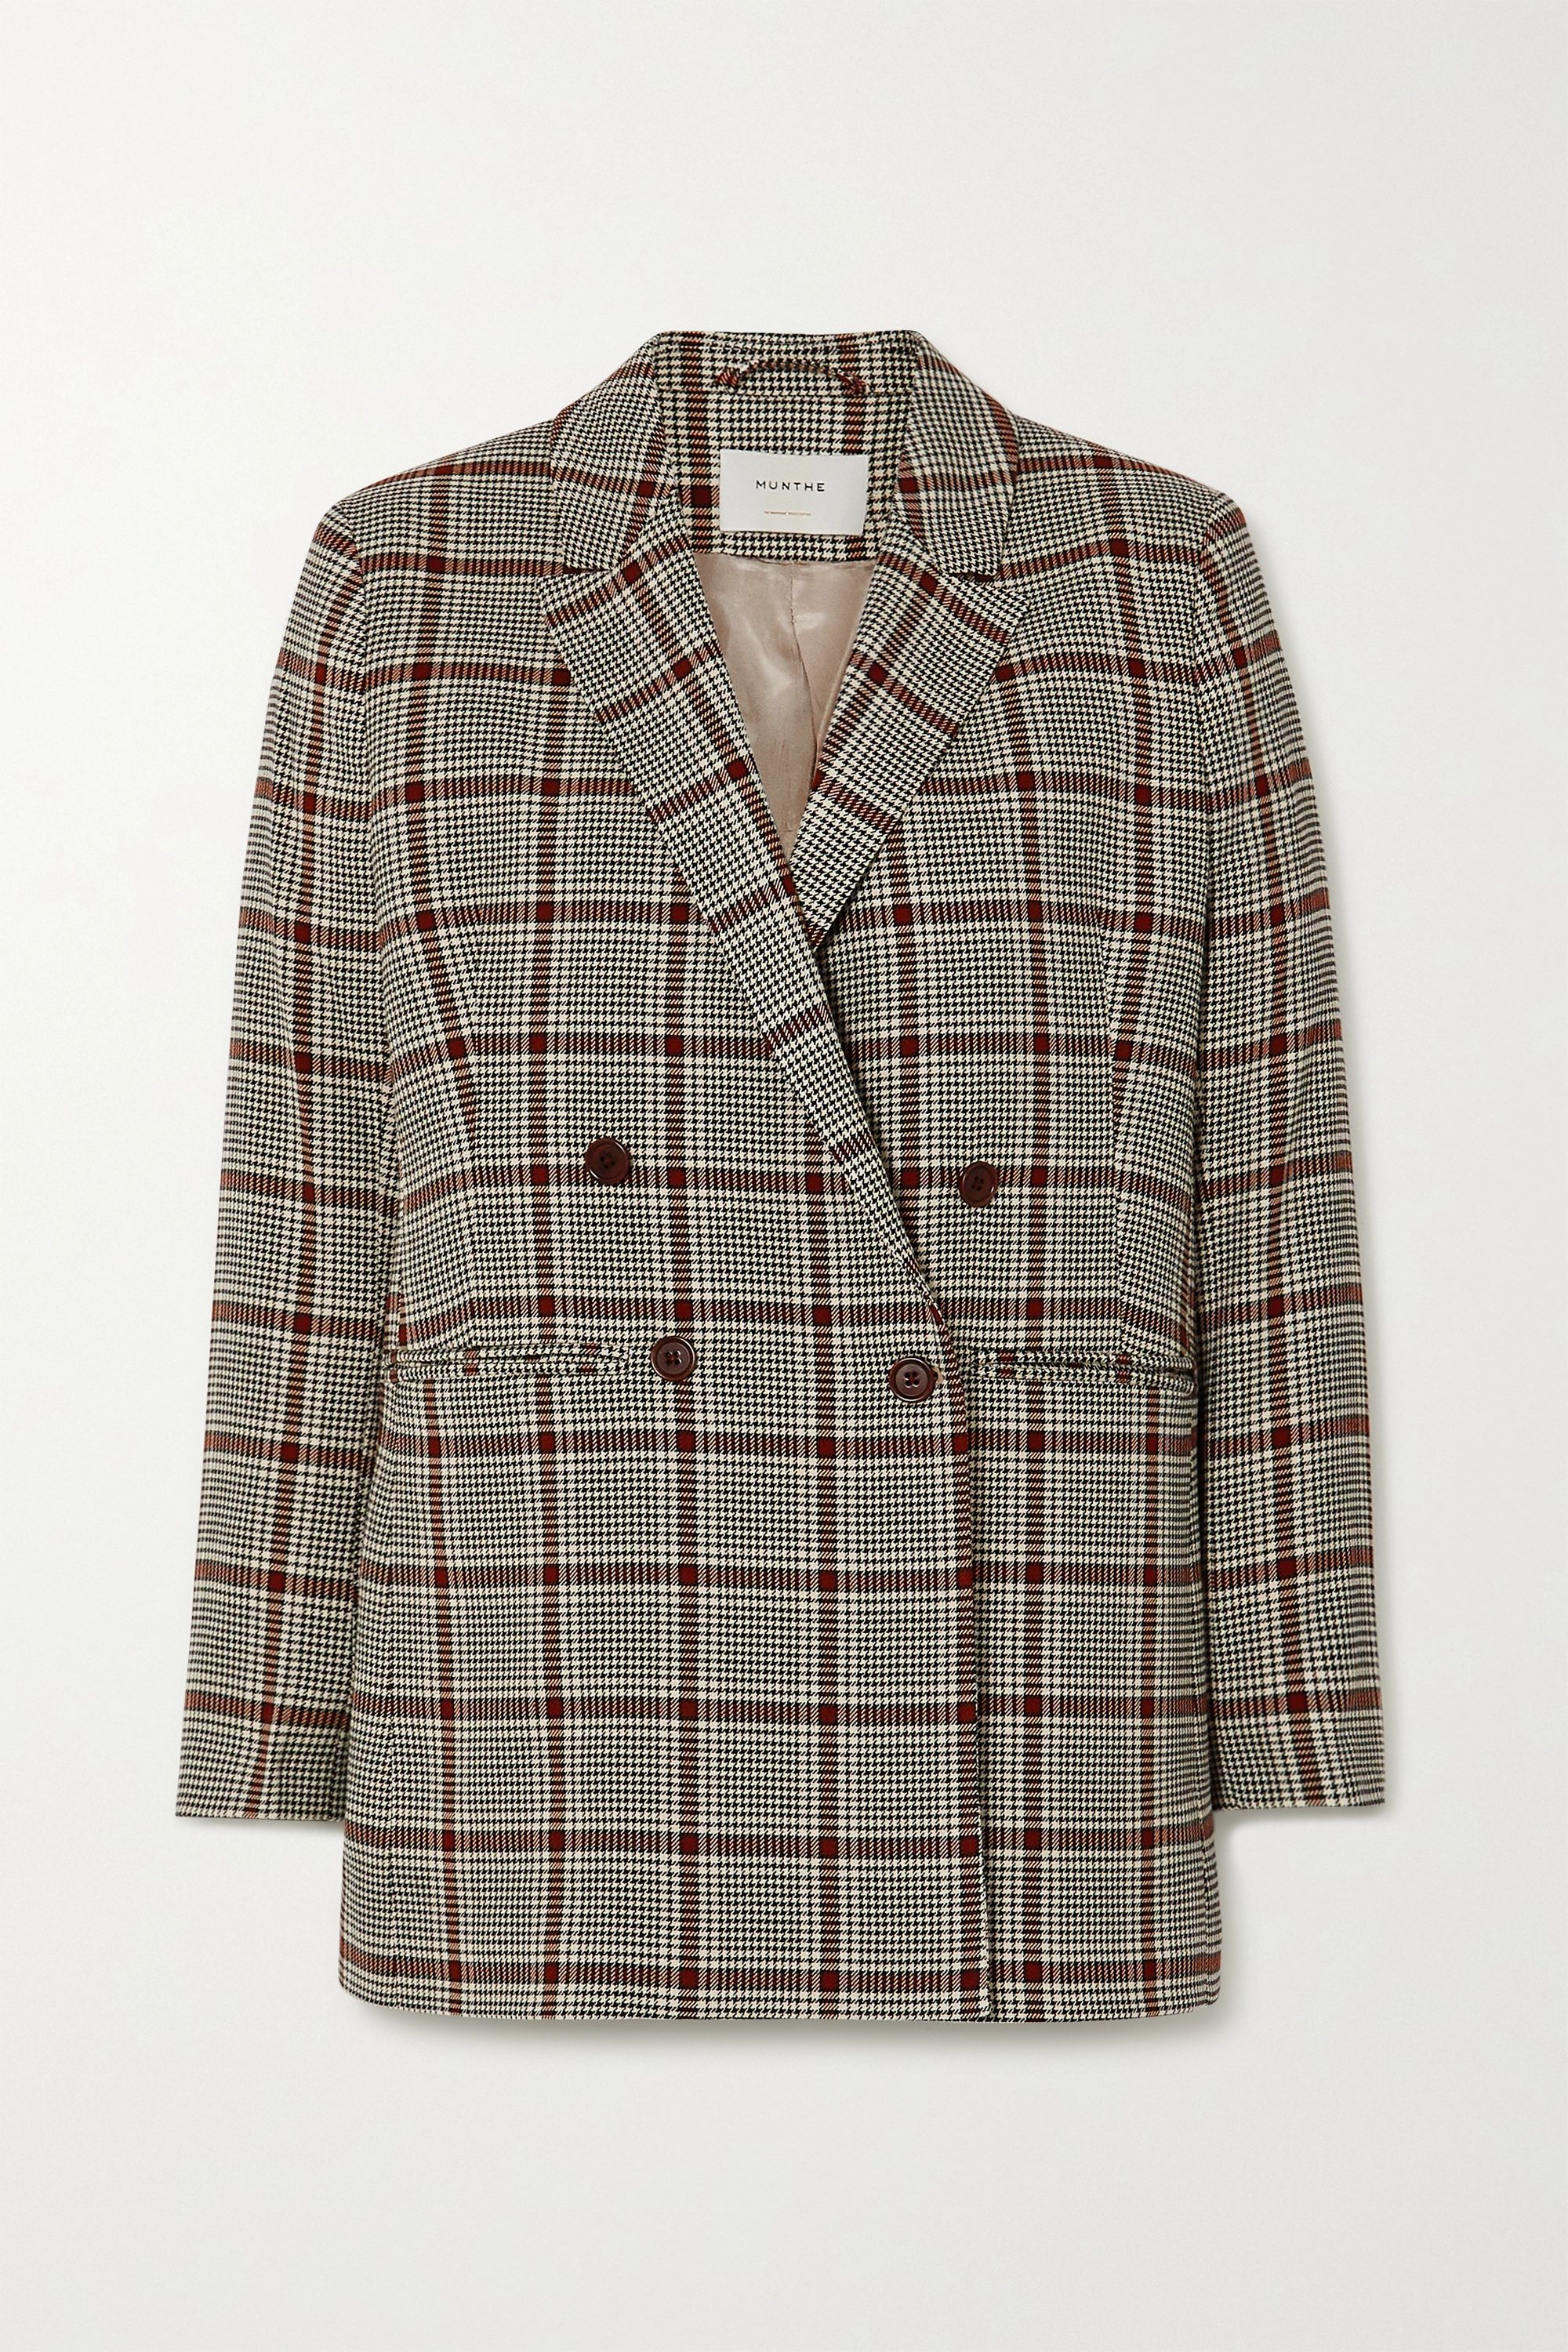 Munthe Lyle Double-Breasted Checked Woven Blazer